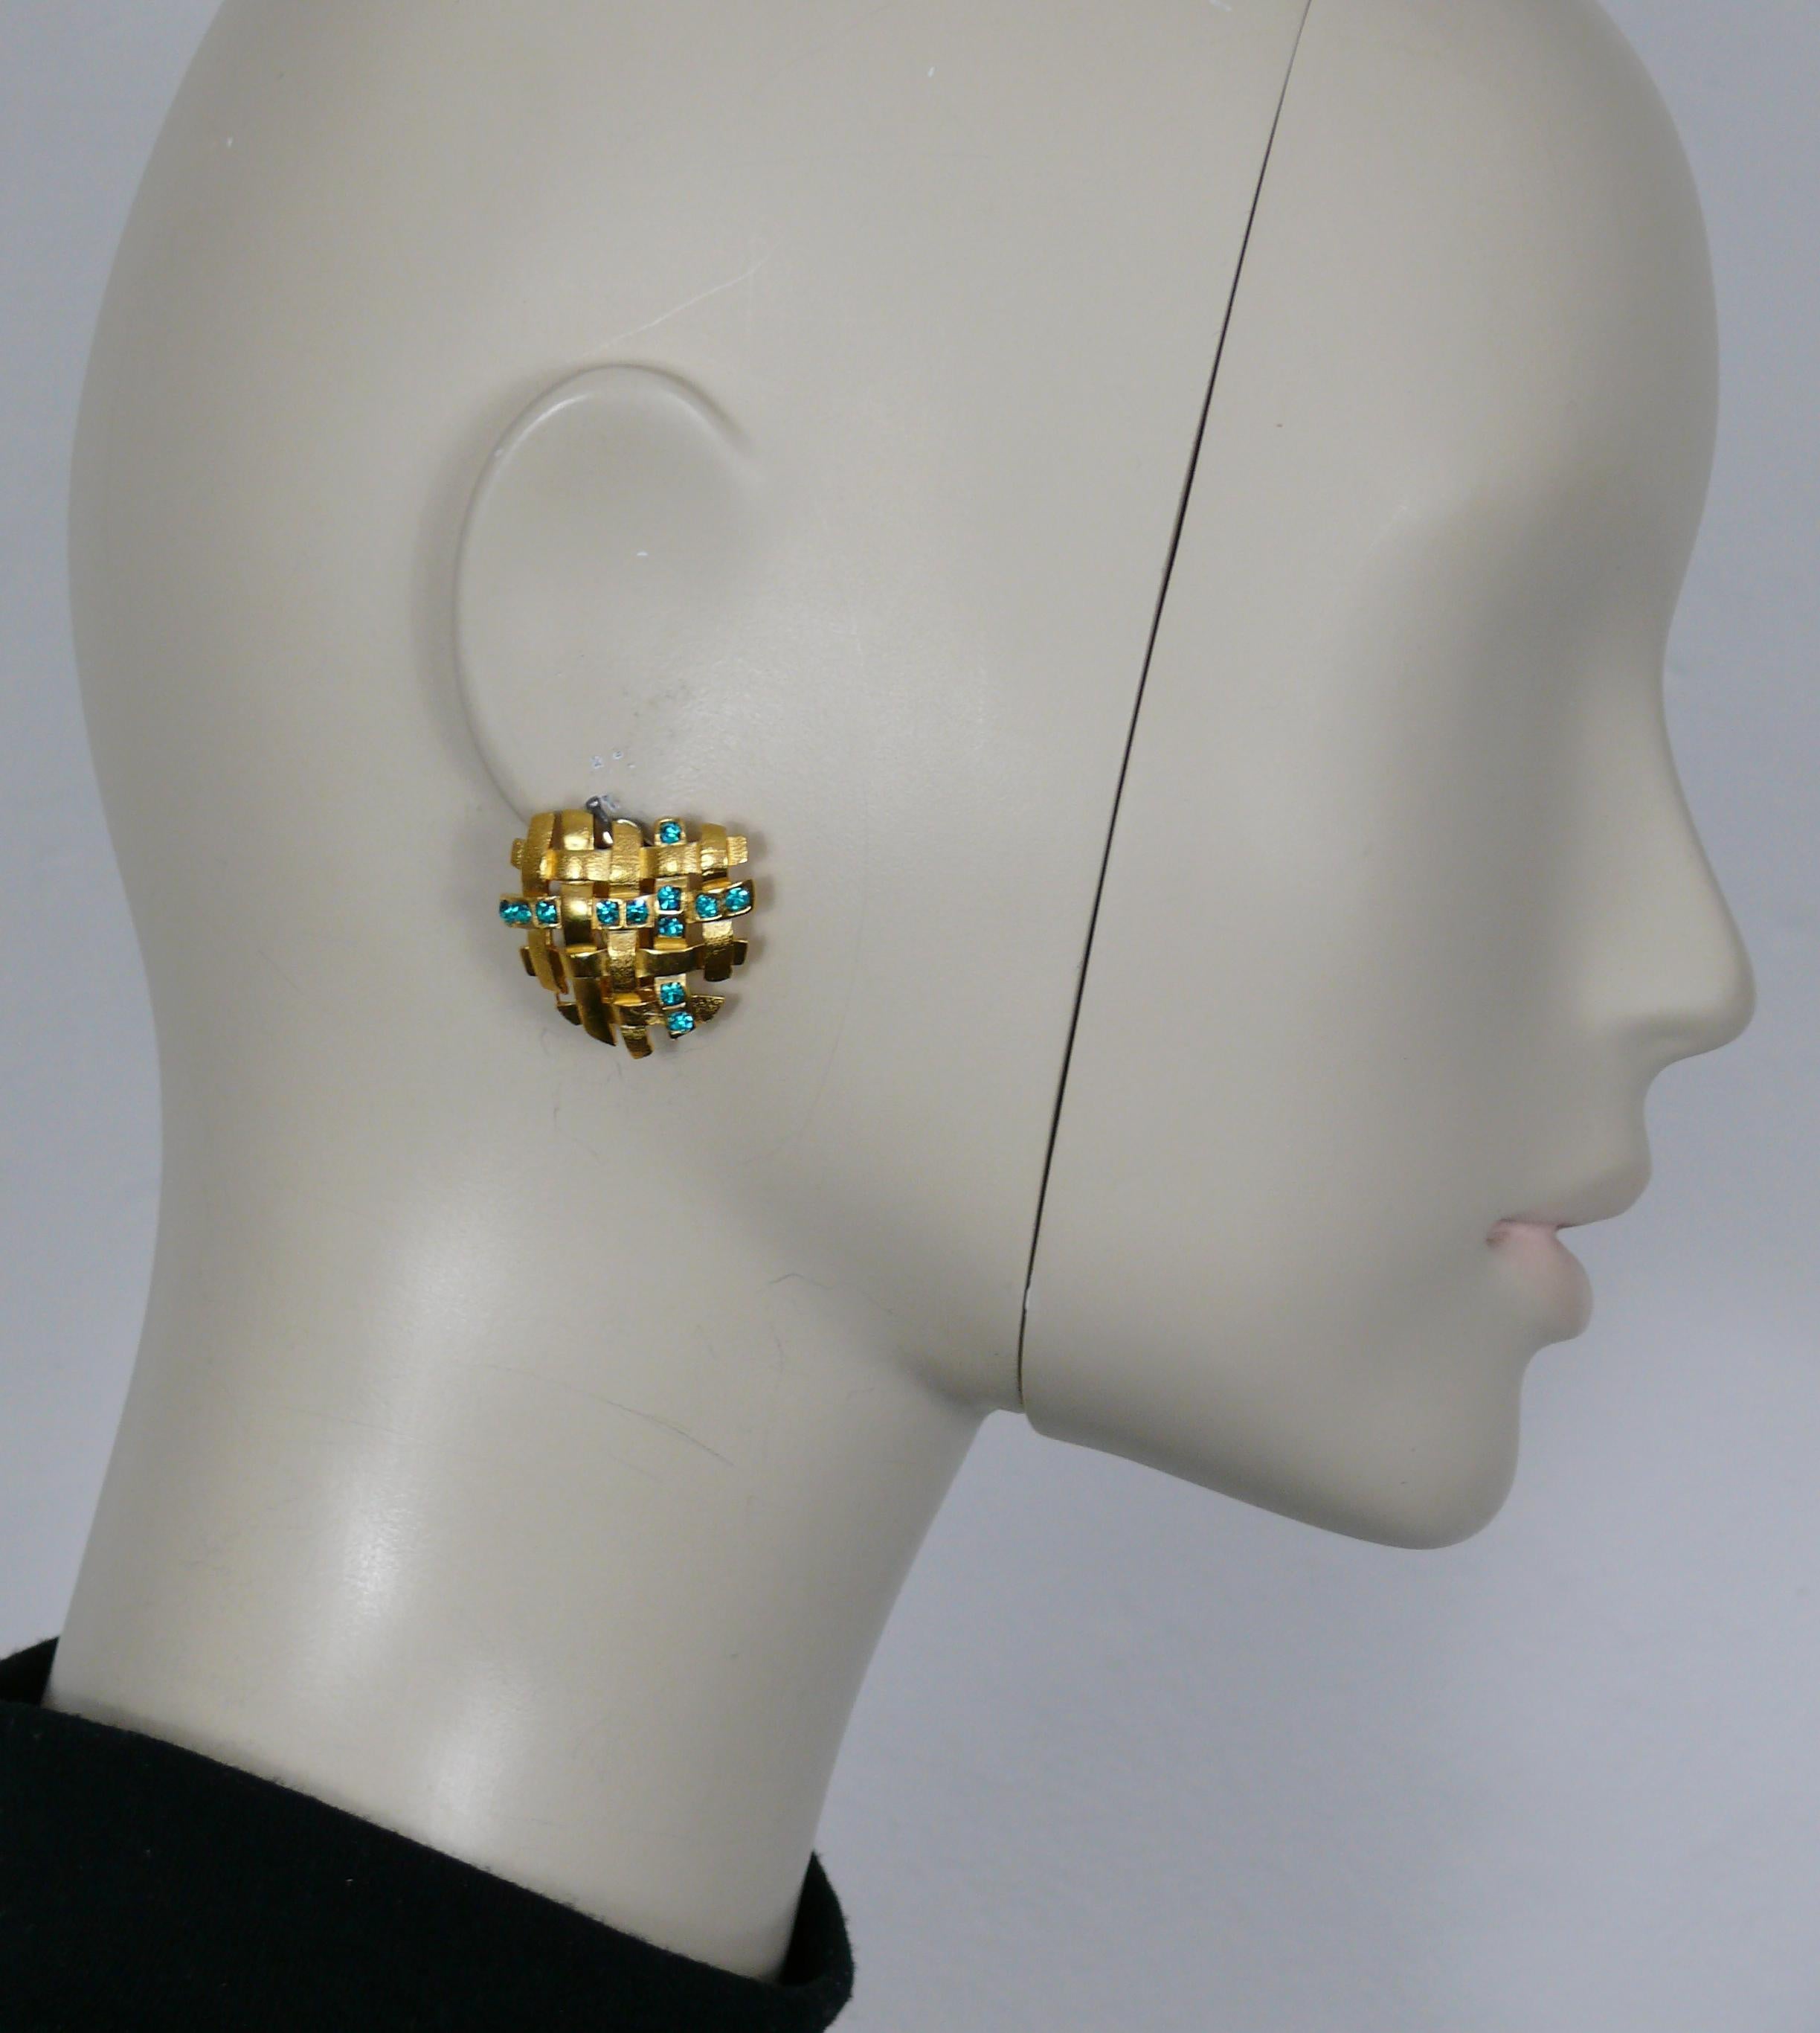 YVES SAINT LAURENT vintage gold tone heart clip-on earrings featuring a braided design embellished with blue crystals.

Embossed YSL Made in France.

Indicative measurements : max. height approx. 2.5 cm (0.98 inch) / max. width approx. 2.3 cm (0.91